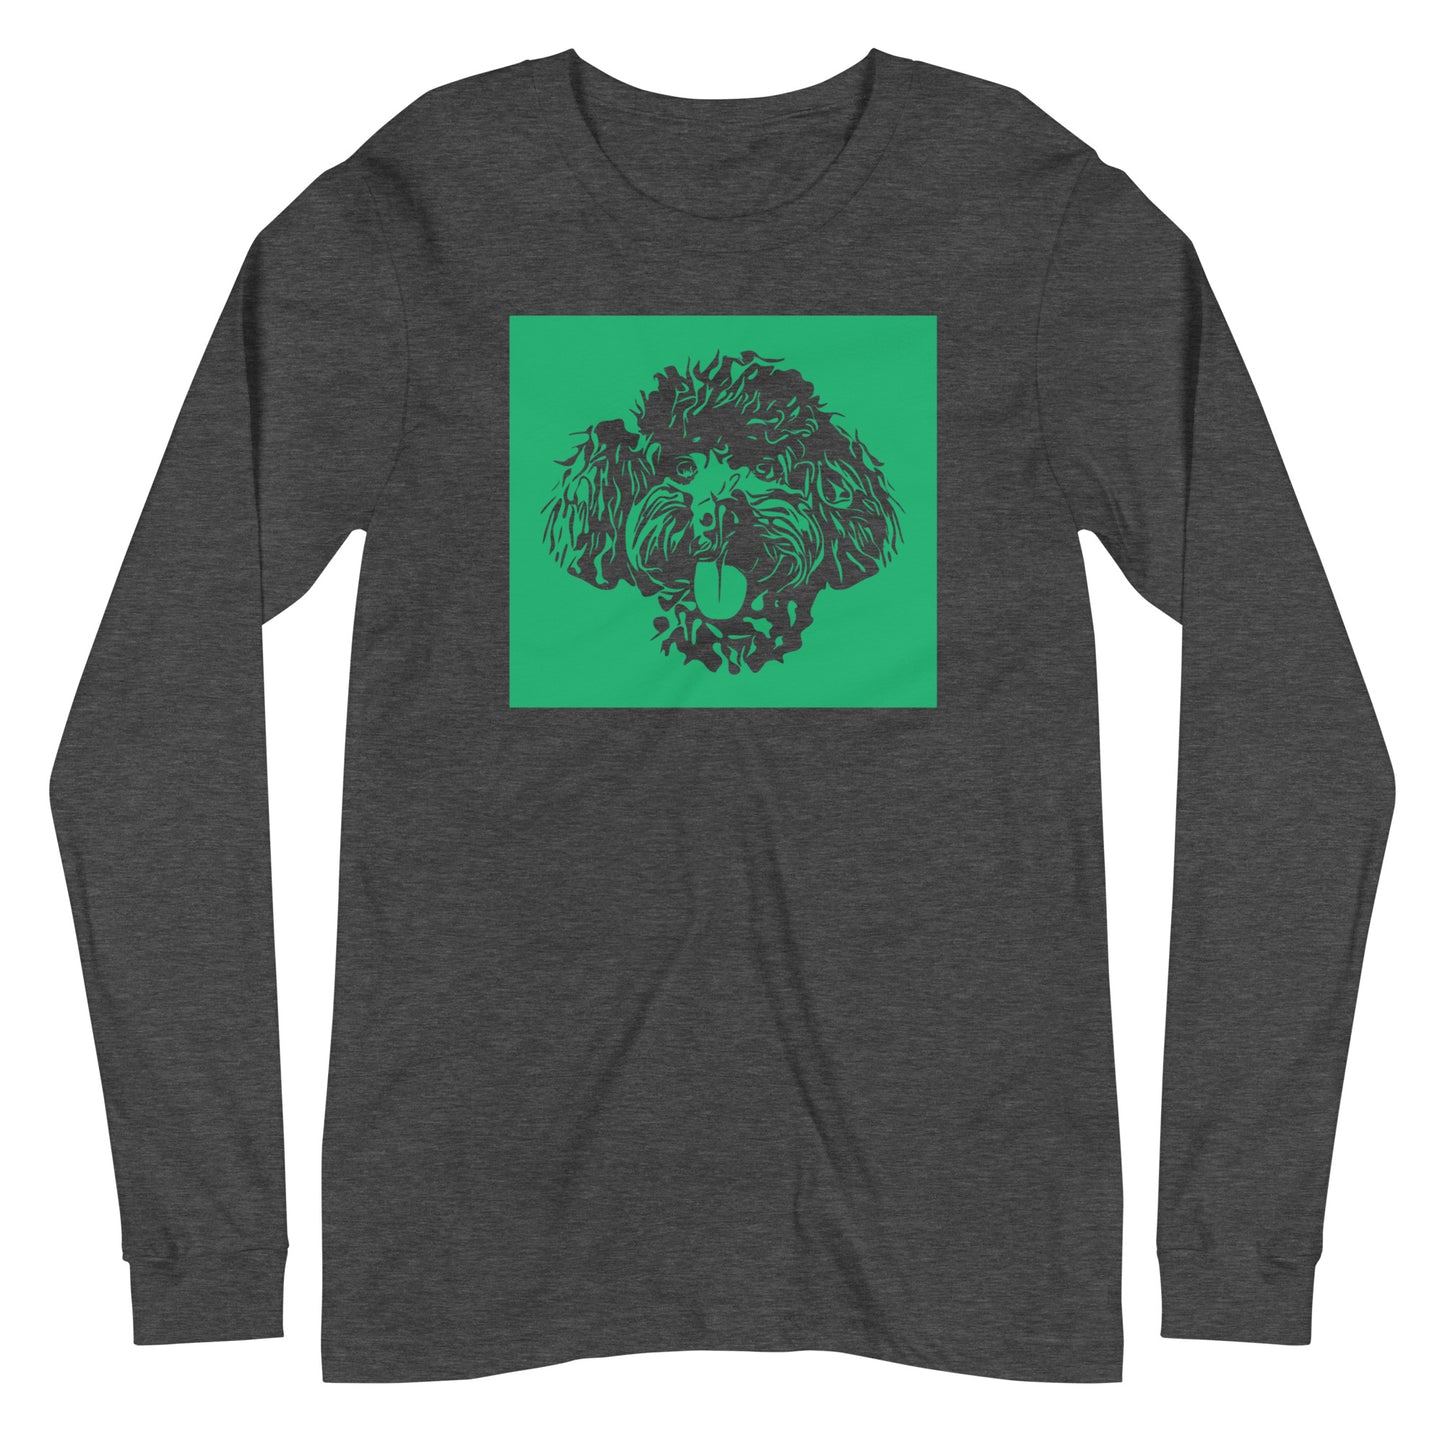 Toy Poodle face Silhouette with green background square on unisex dark grey heather long sleeve t-shirt